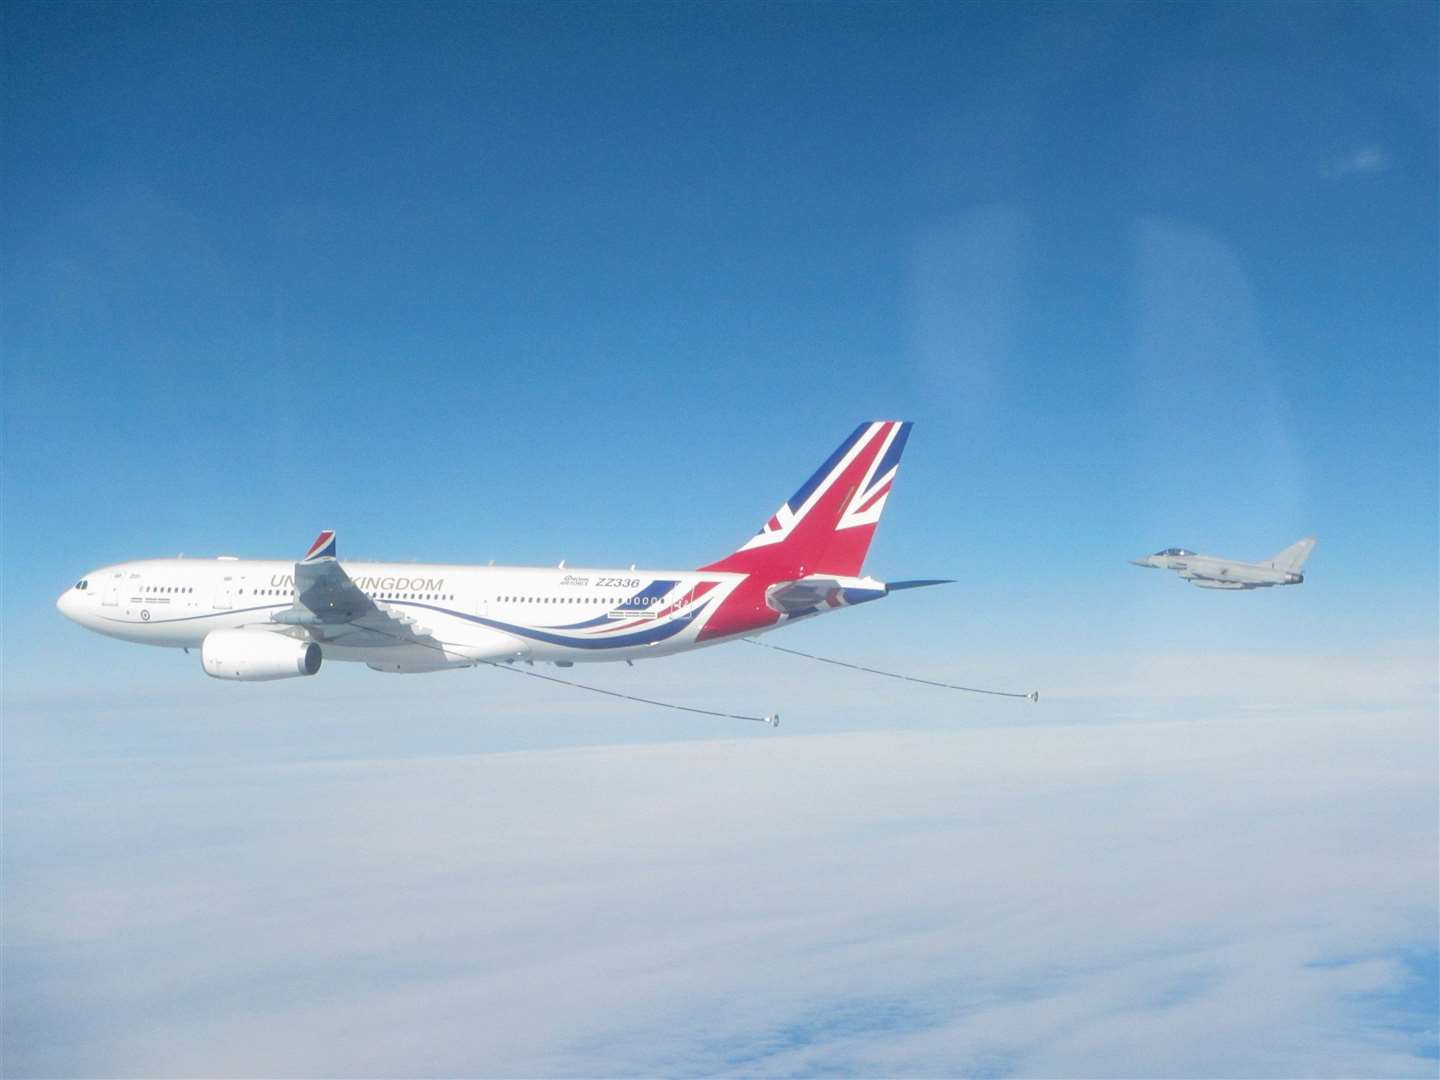 Typhoons from RAF Lossiemouth Refuel with RAF Voyager, Vespina.